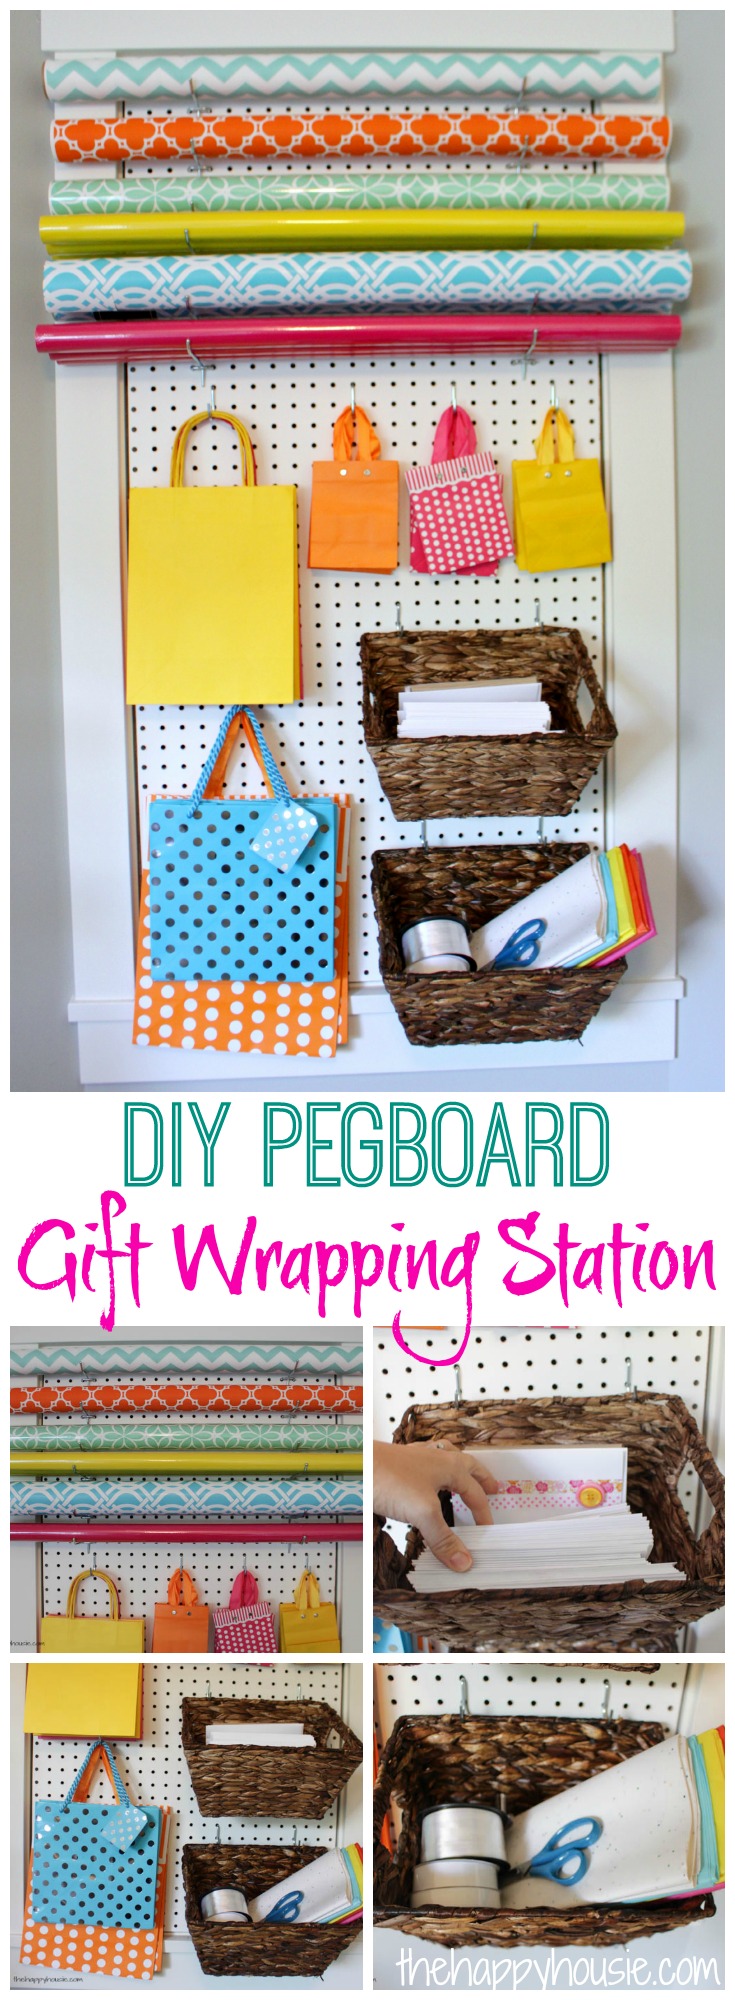 This DIY Pegboard Gift Wrapping Station is an amazing use of space and makes organizing your gift wrapping supplies functional and pretty all at once!